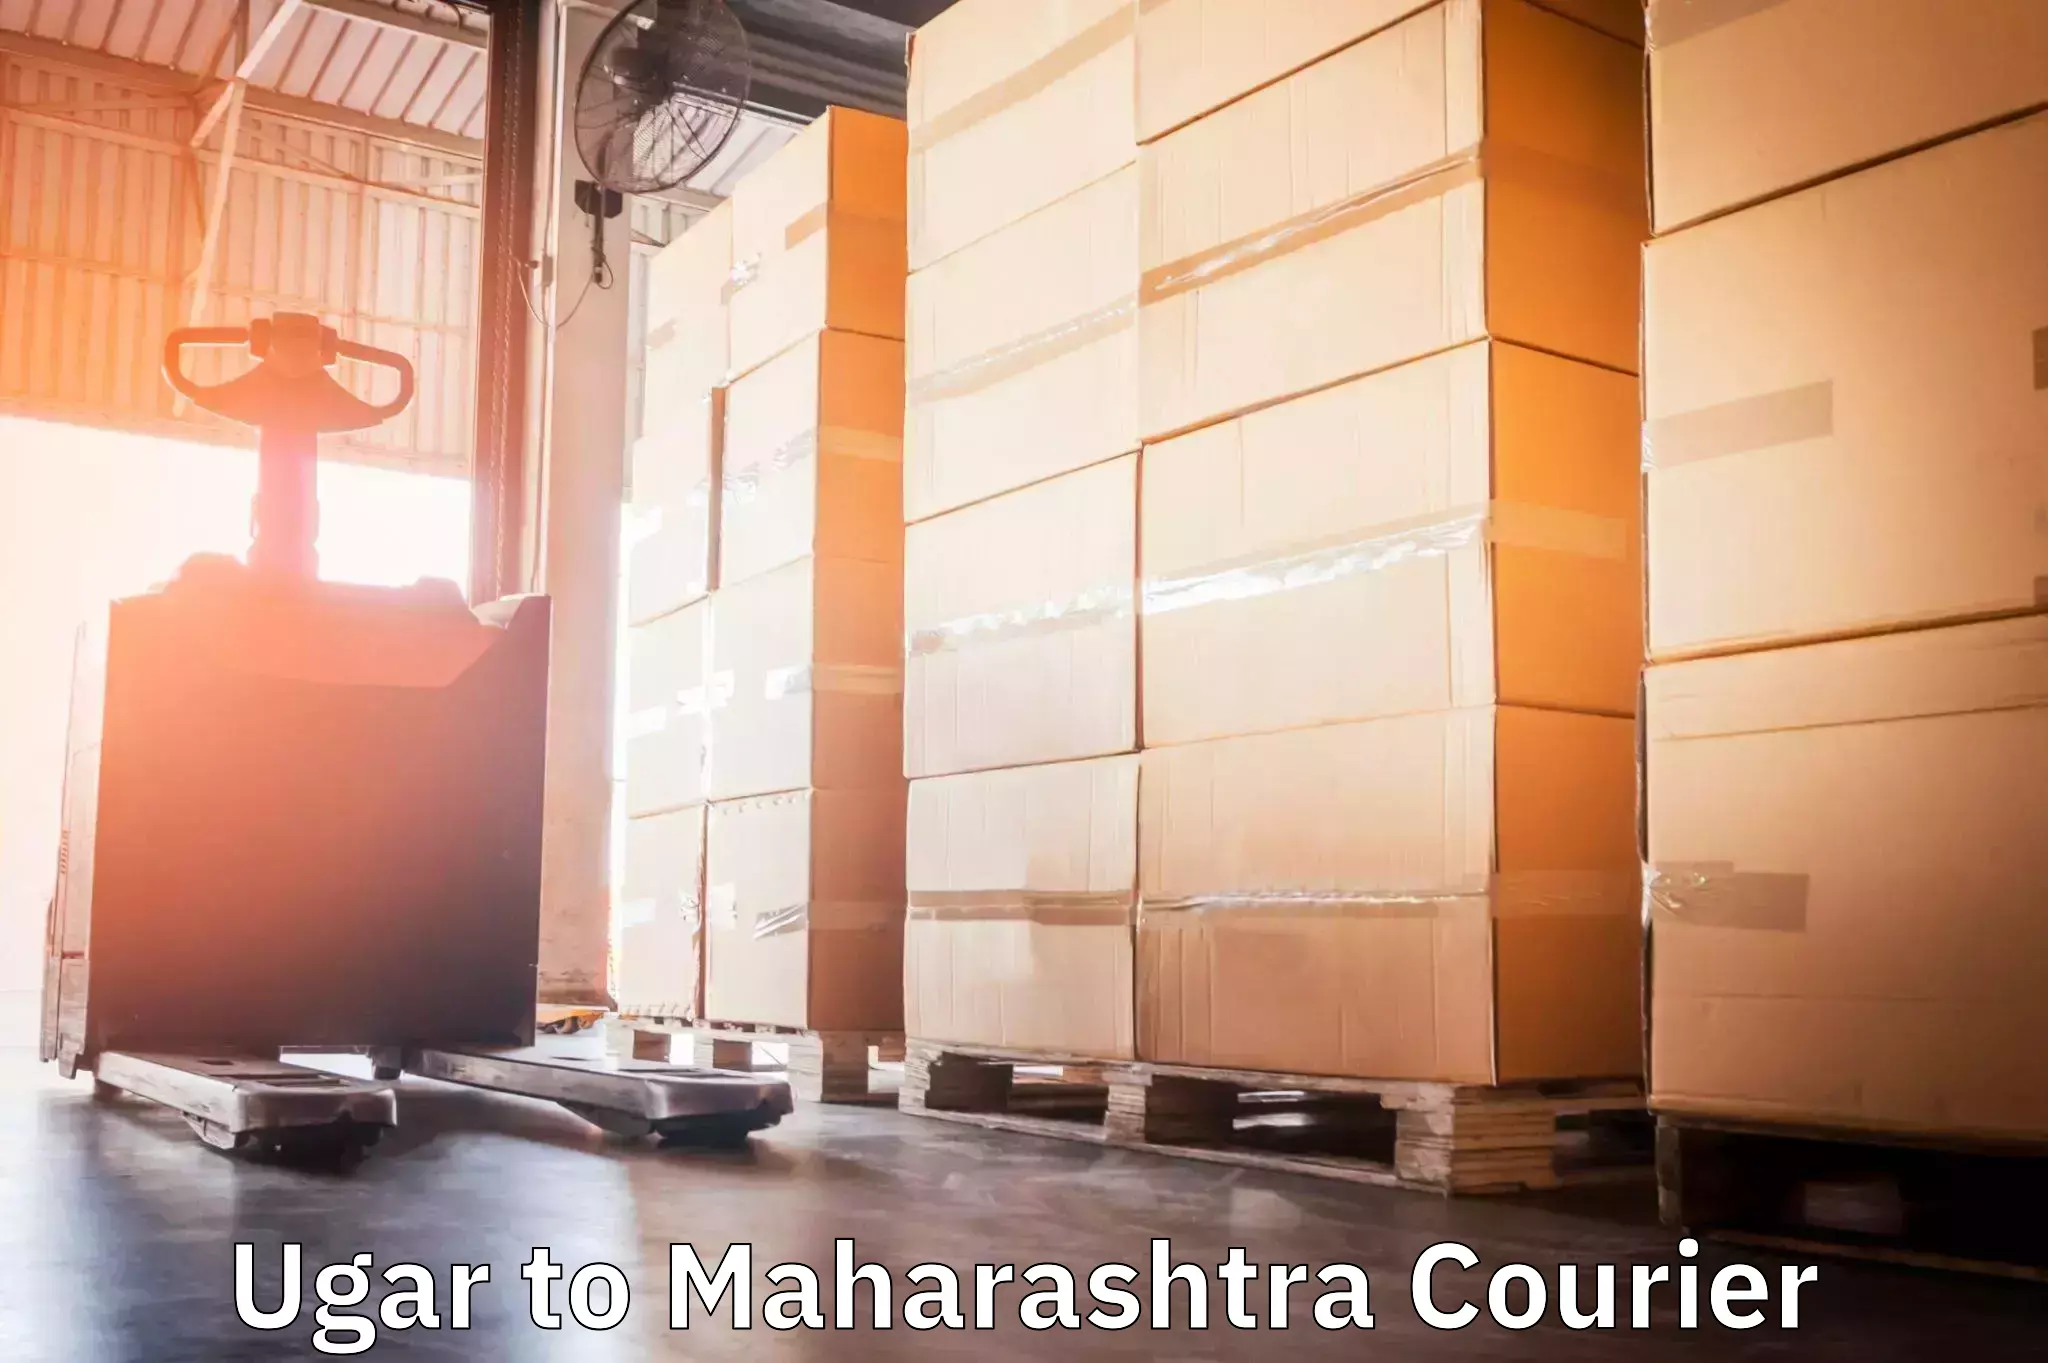 24-hour courier service Ugar to Wardha